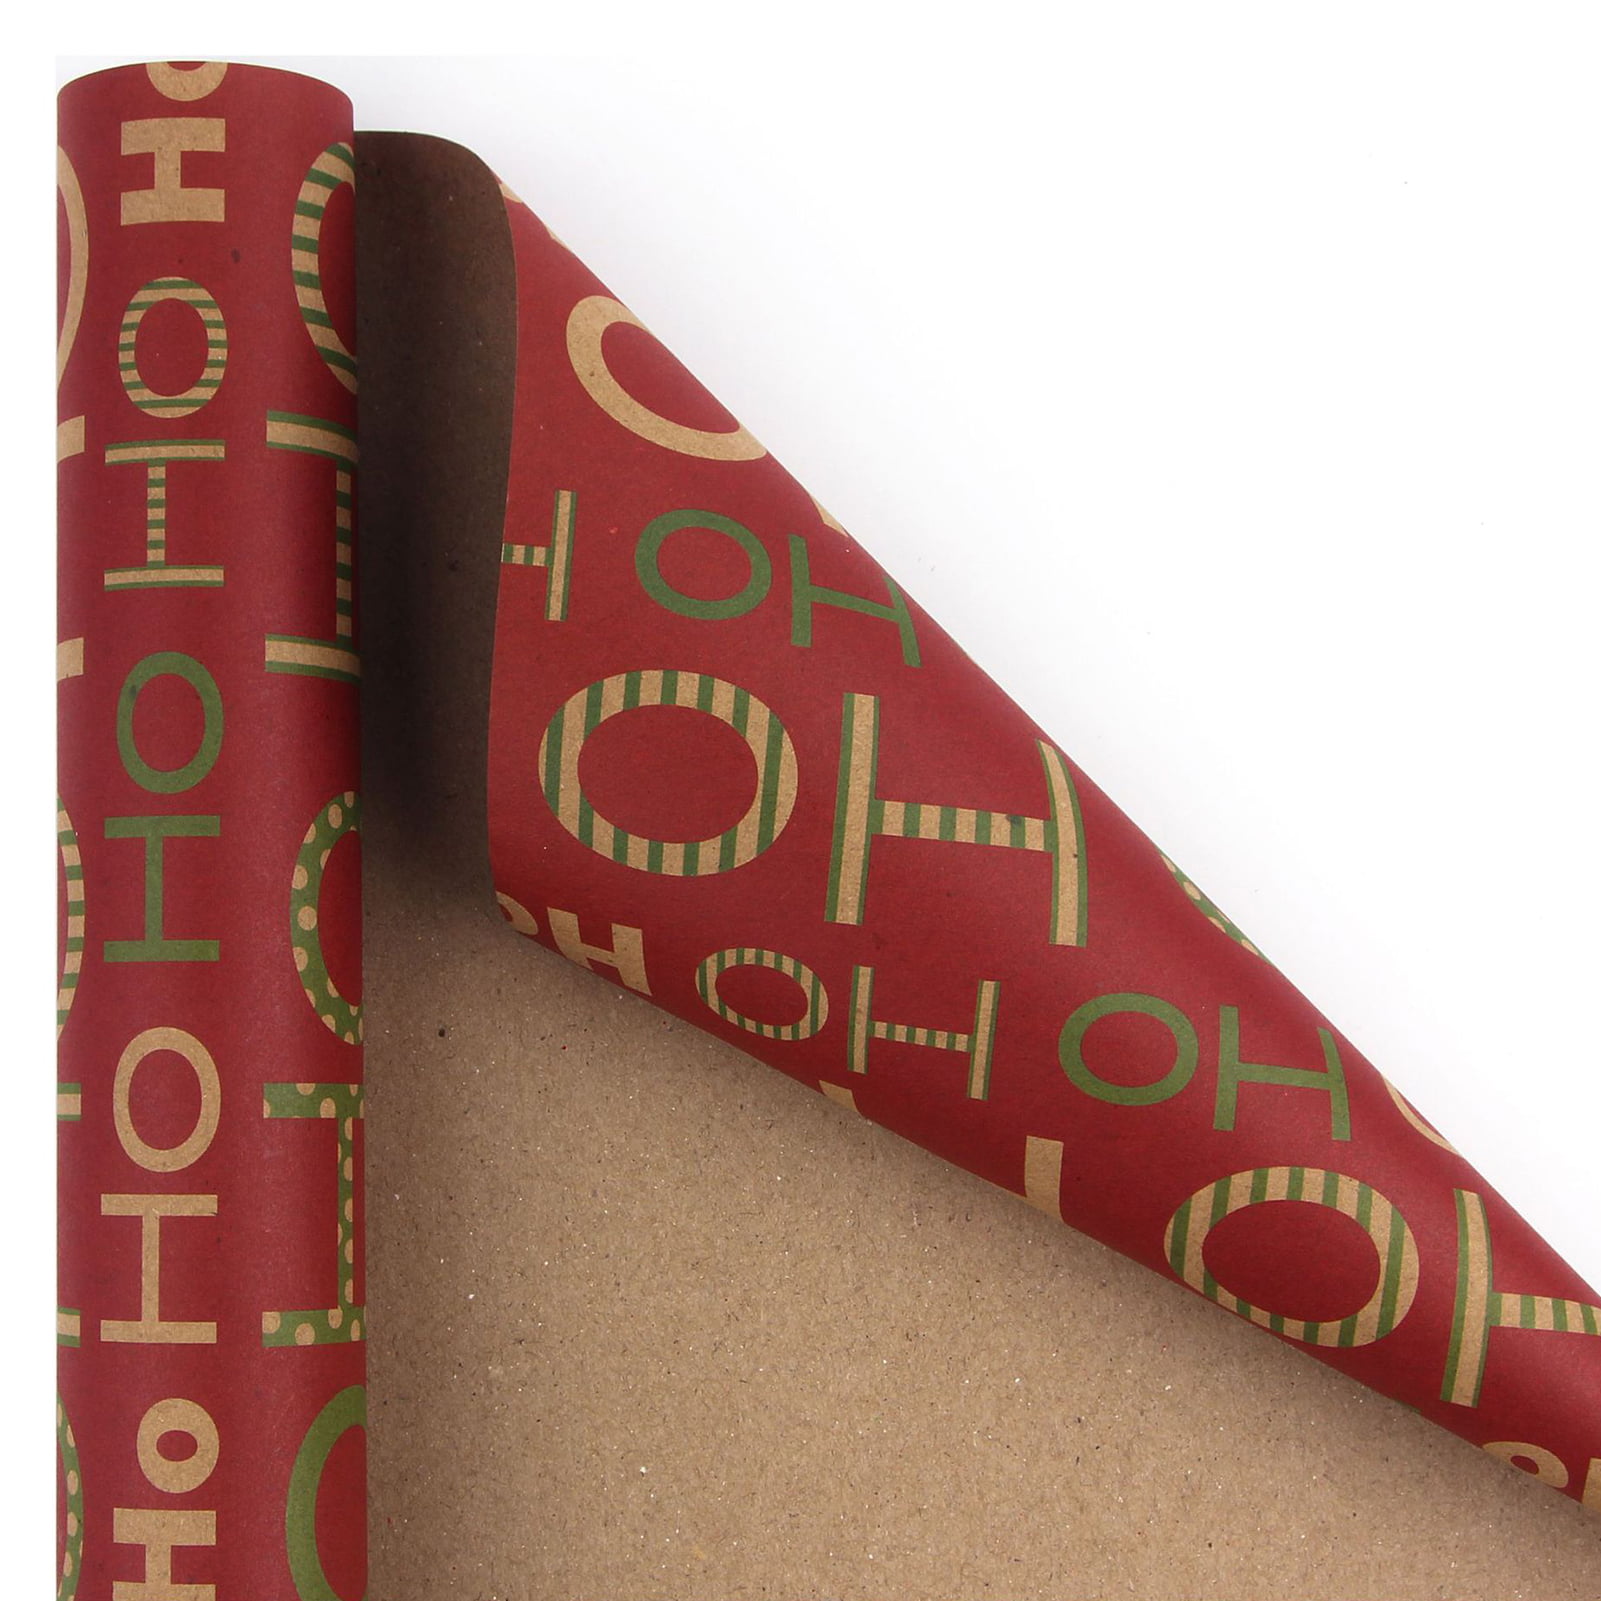 Wrapping Paper Eye-catching Delicate Texture Paper Seasonal Gifts Packing  Papers for Party Beige Paper